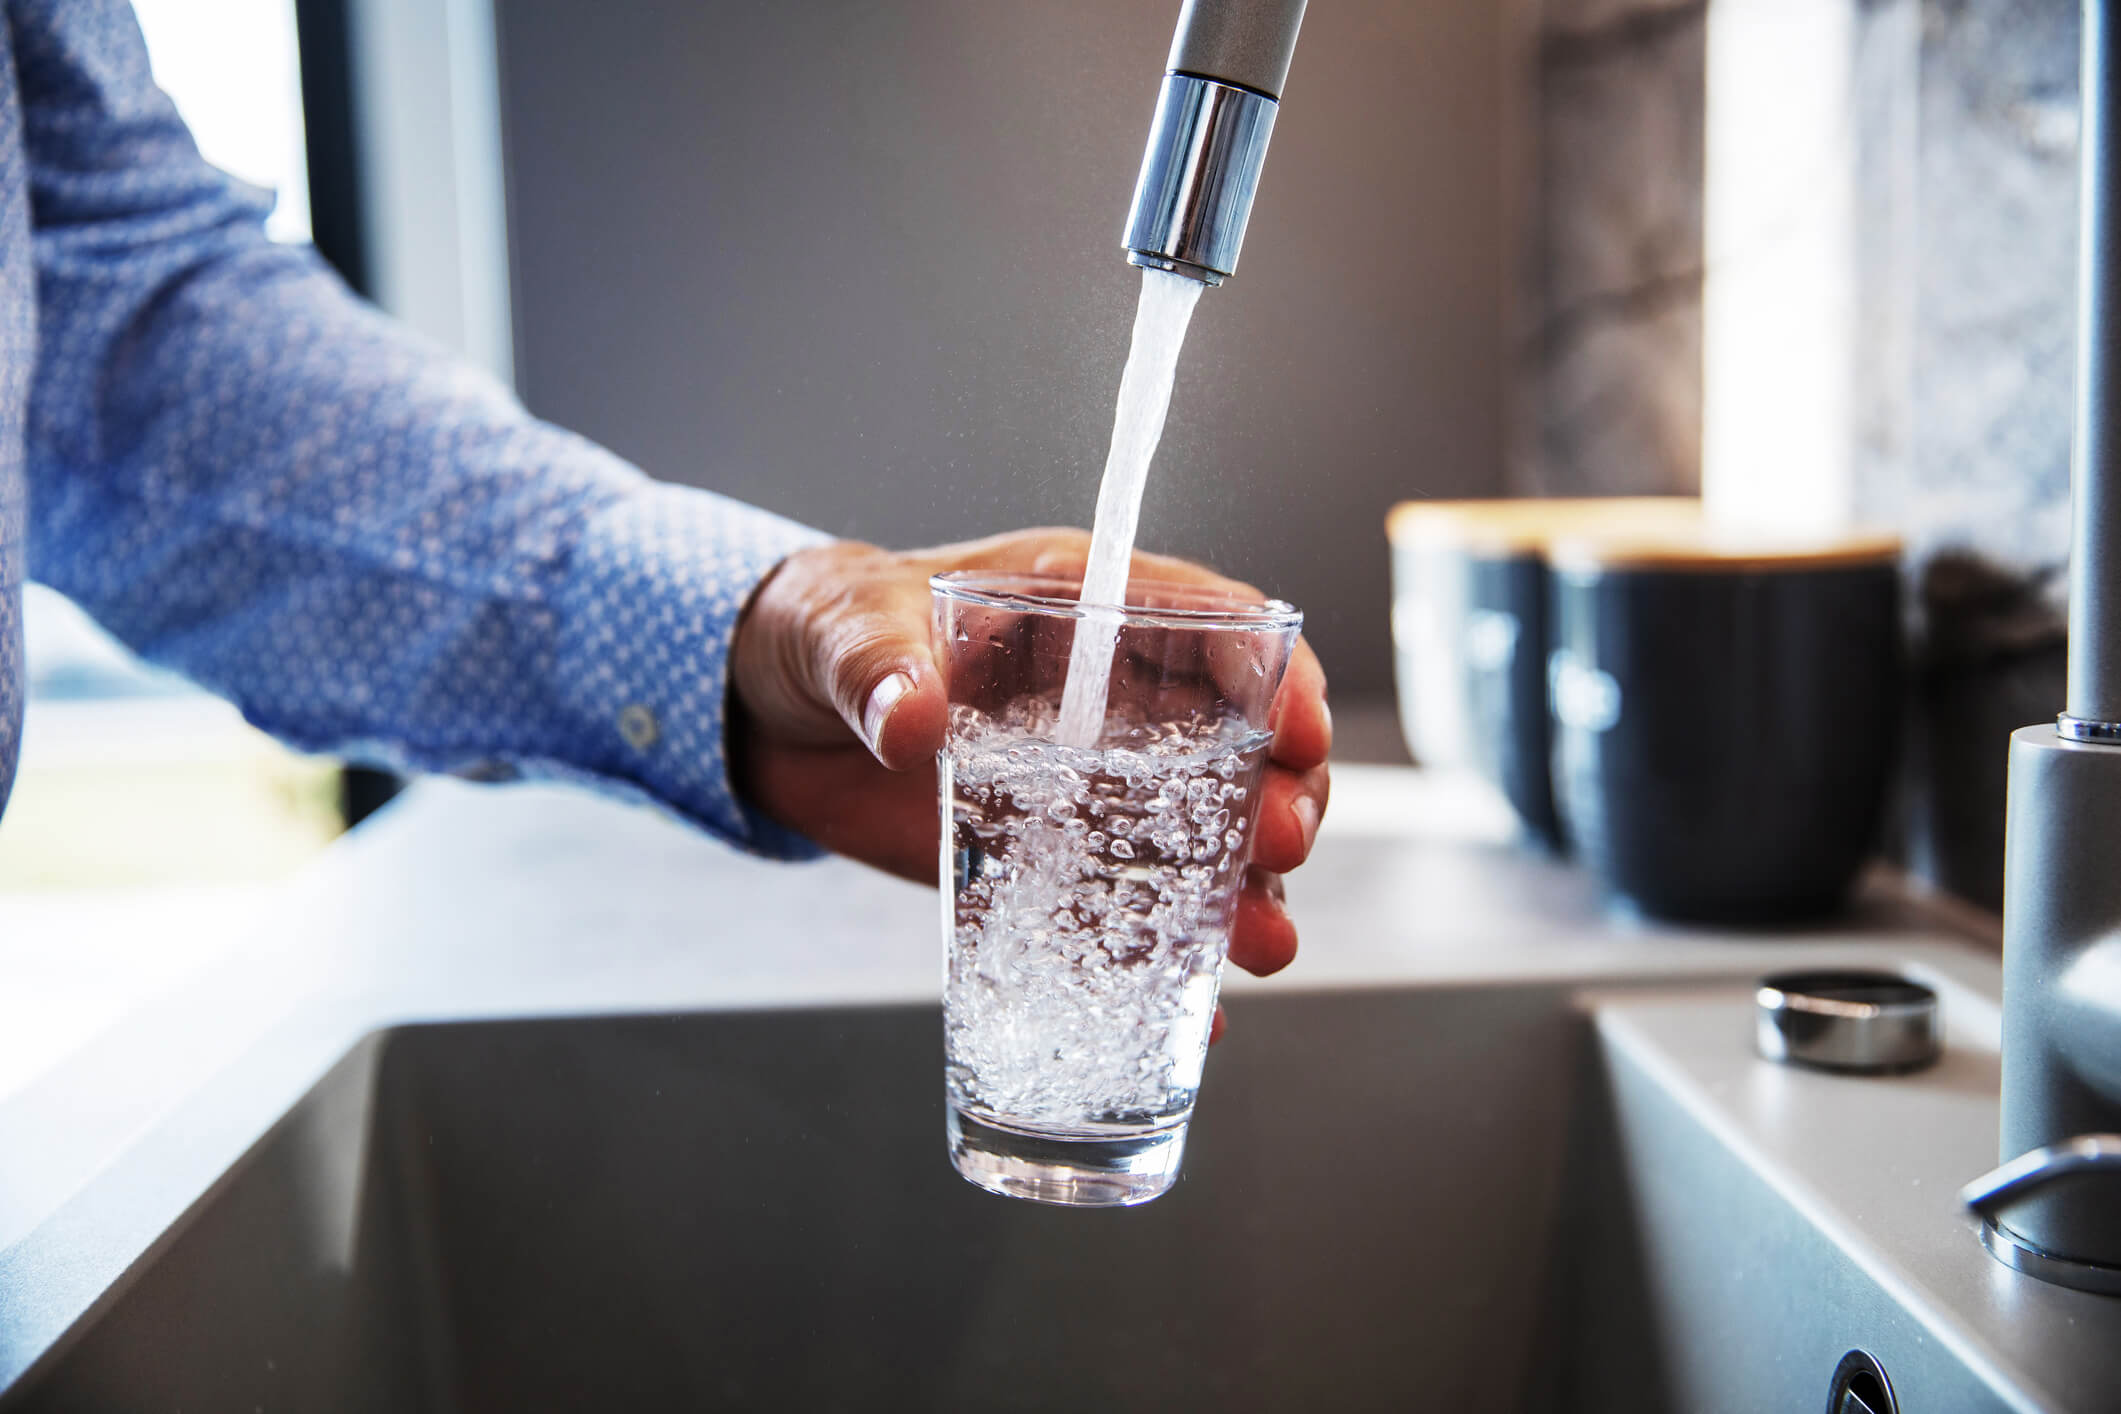 home drinking water quality